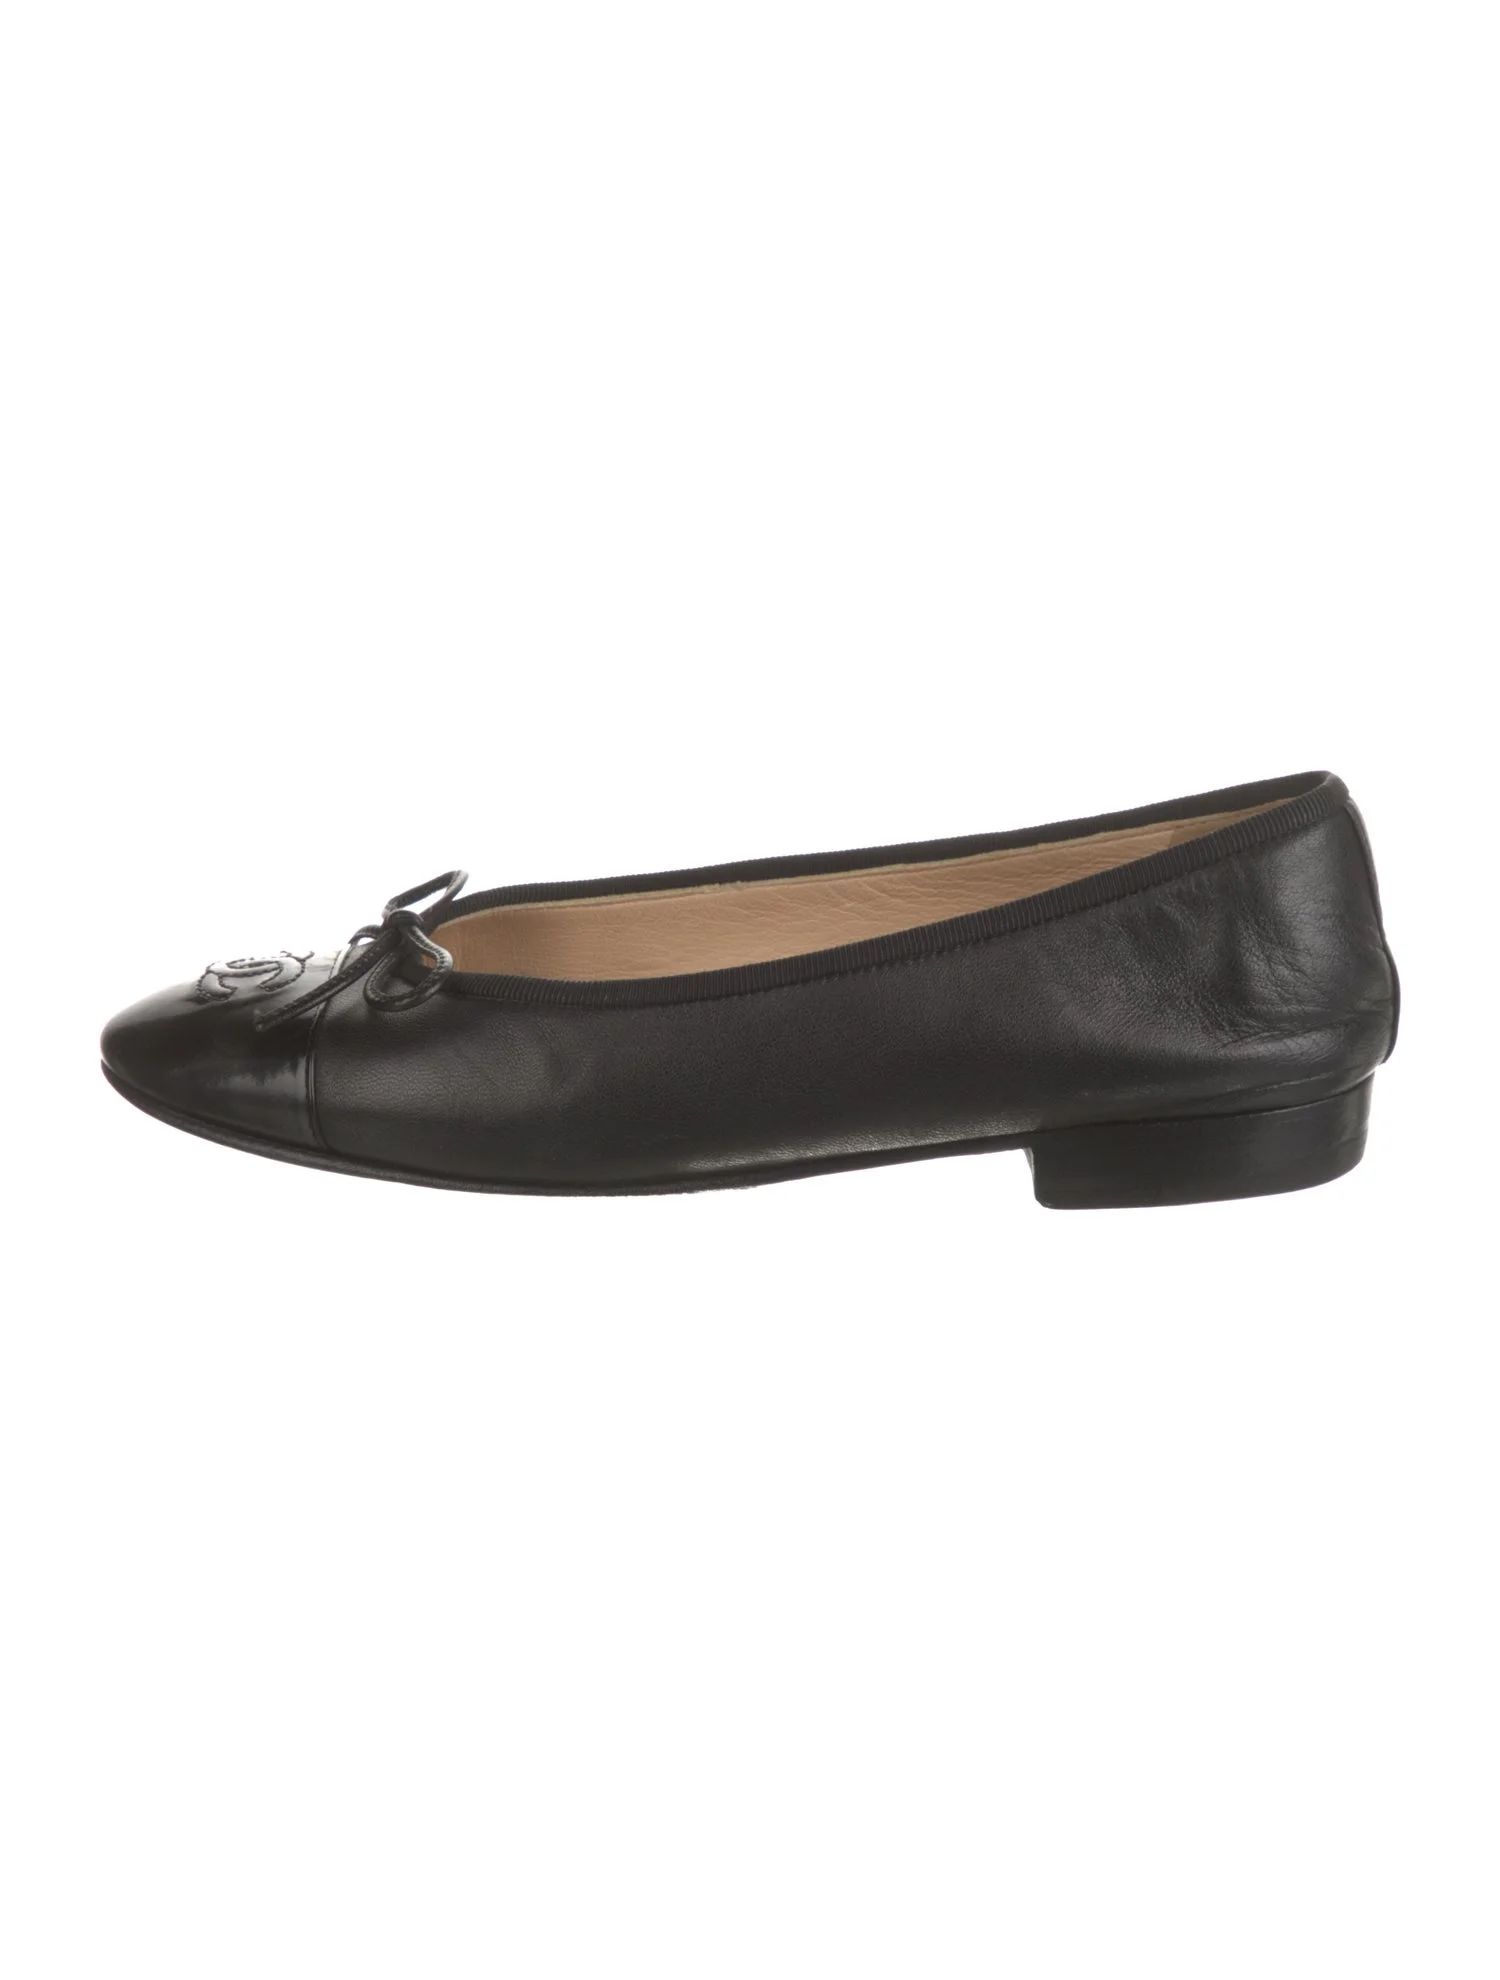 Chanel Leather Ballet Flats | The RealReal